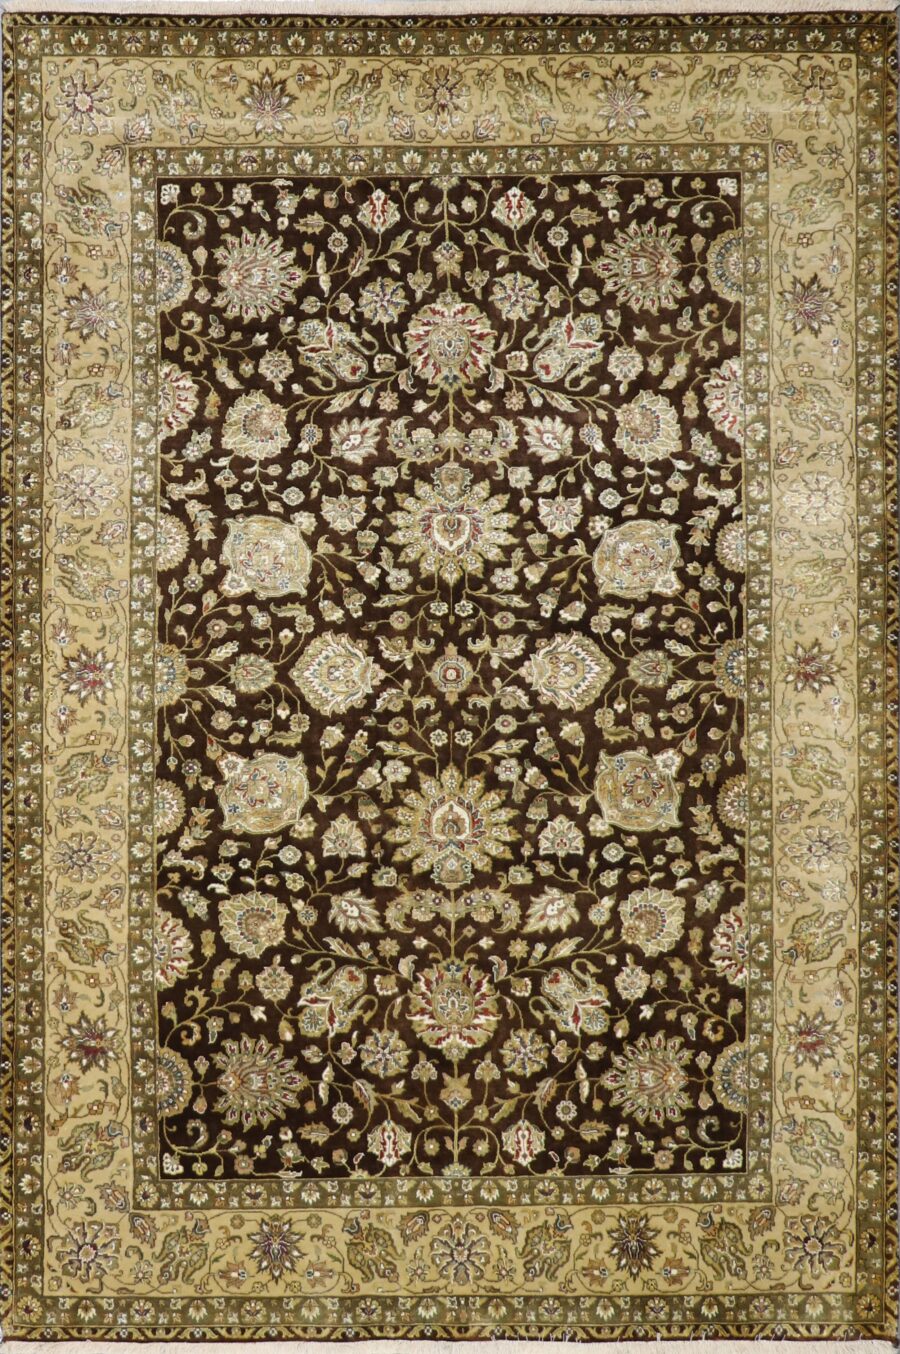 5'6"x8'9" Traditional Brown Silk Hand-Knotted Rug - Direct Rug Import | Rugs in Chicago, Indiana,South Bend,Granger